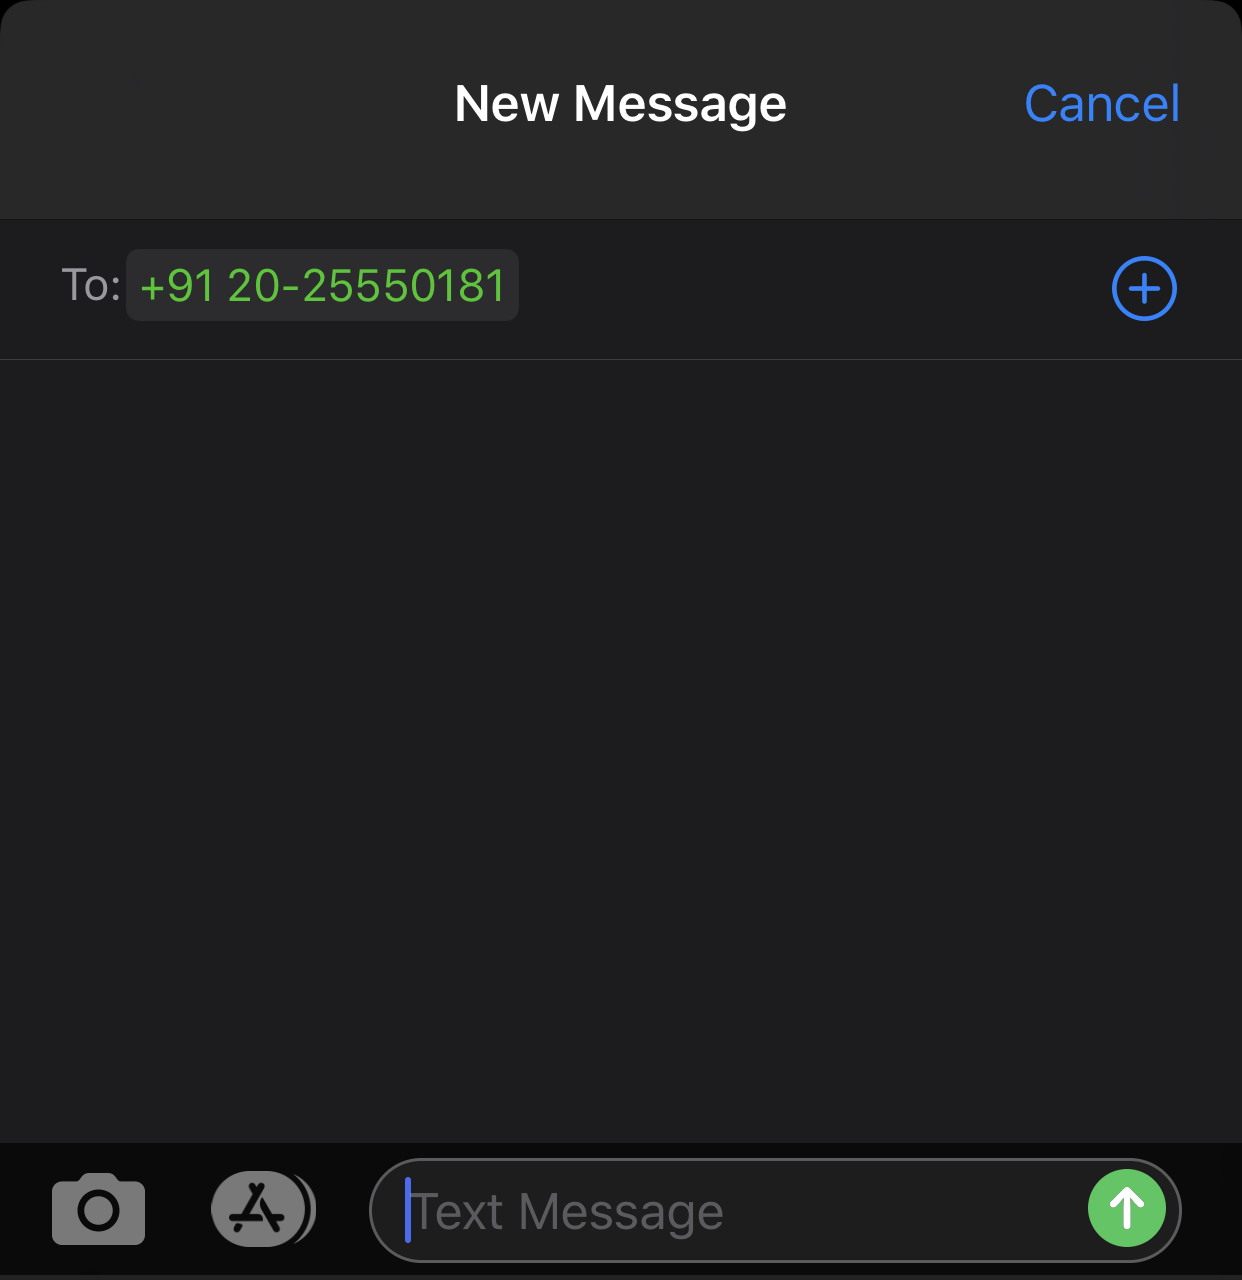 New message window is poped open on IPhone.